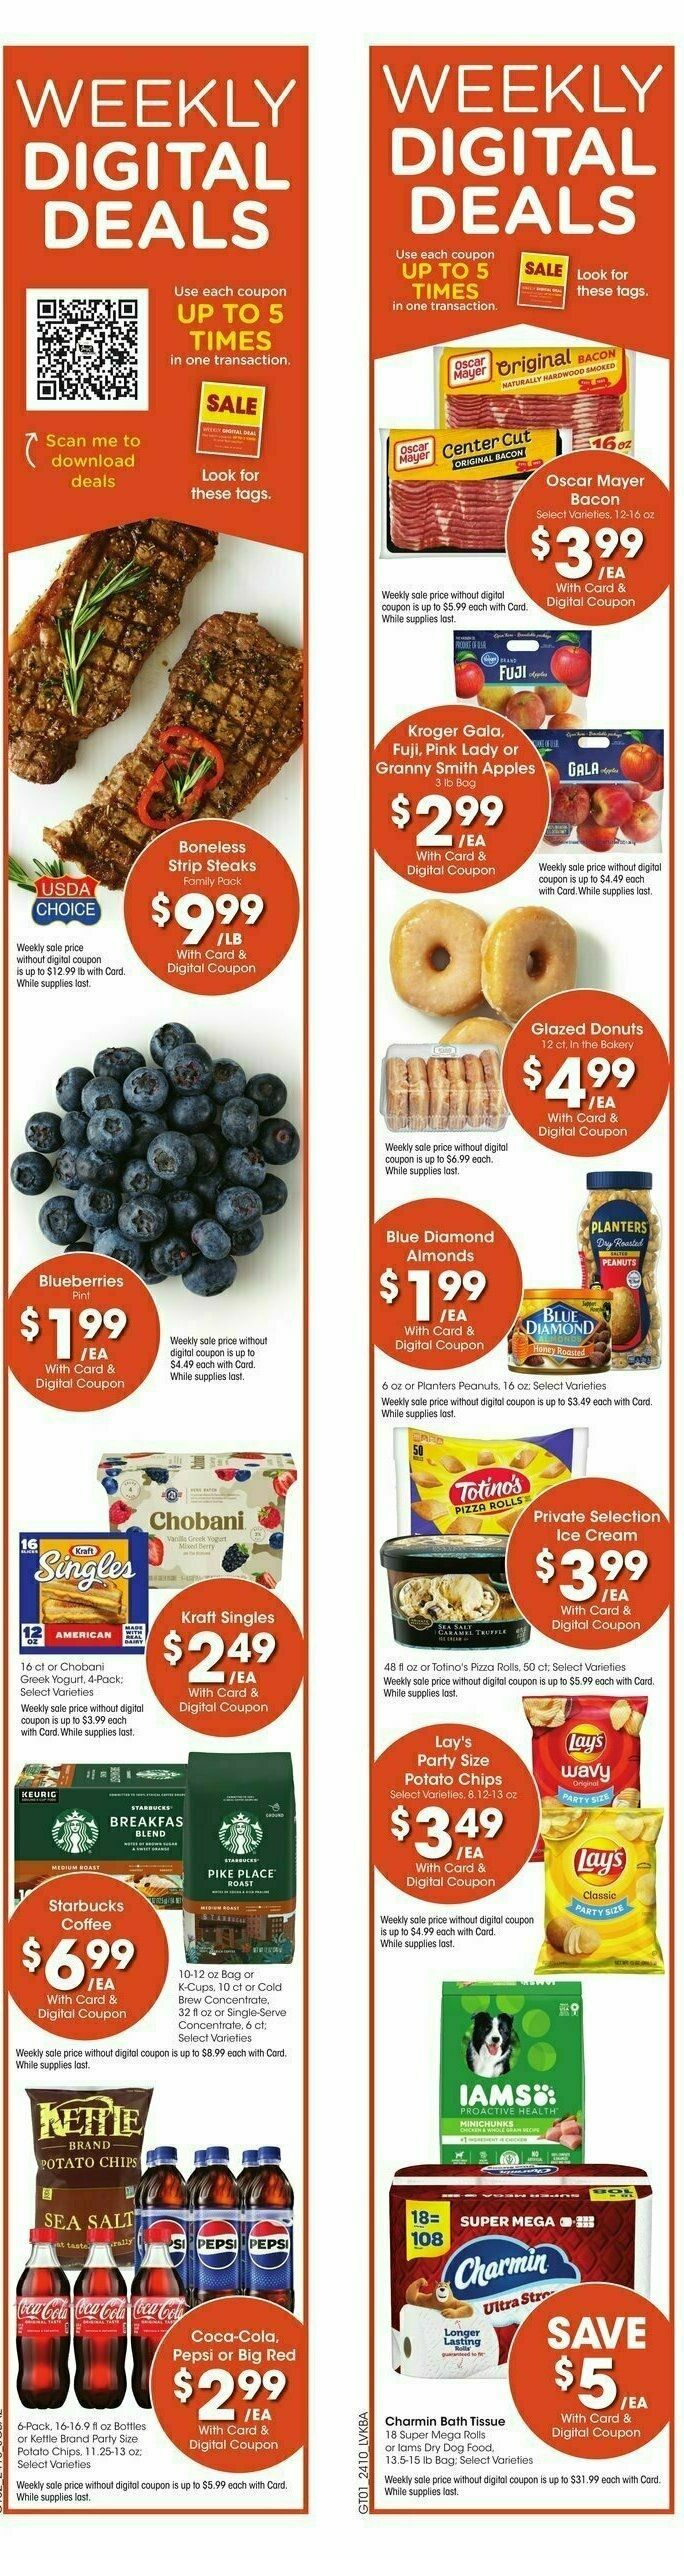 Jay C Food Weekly Ad from April 10